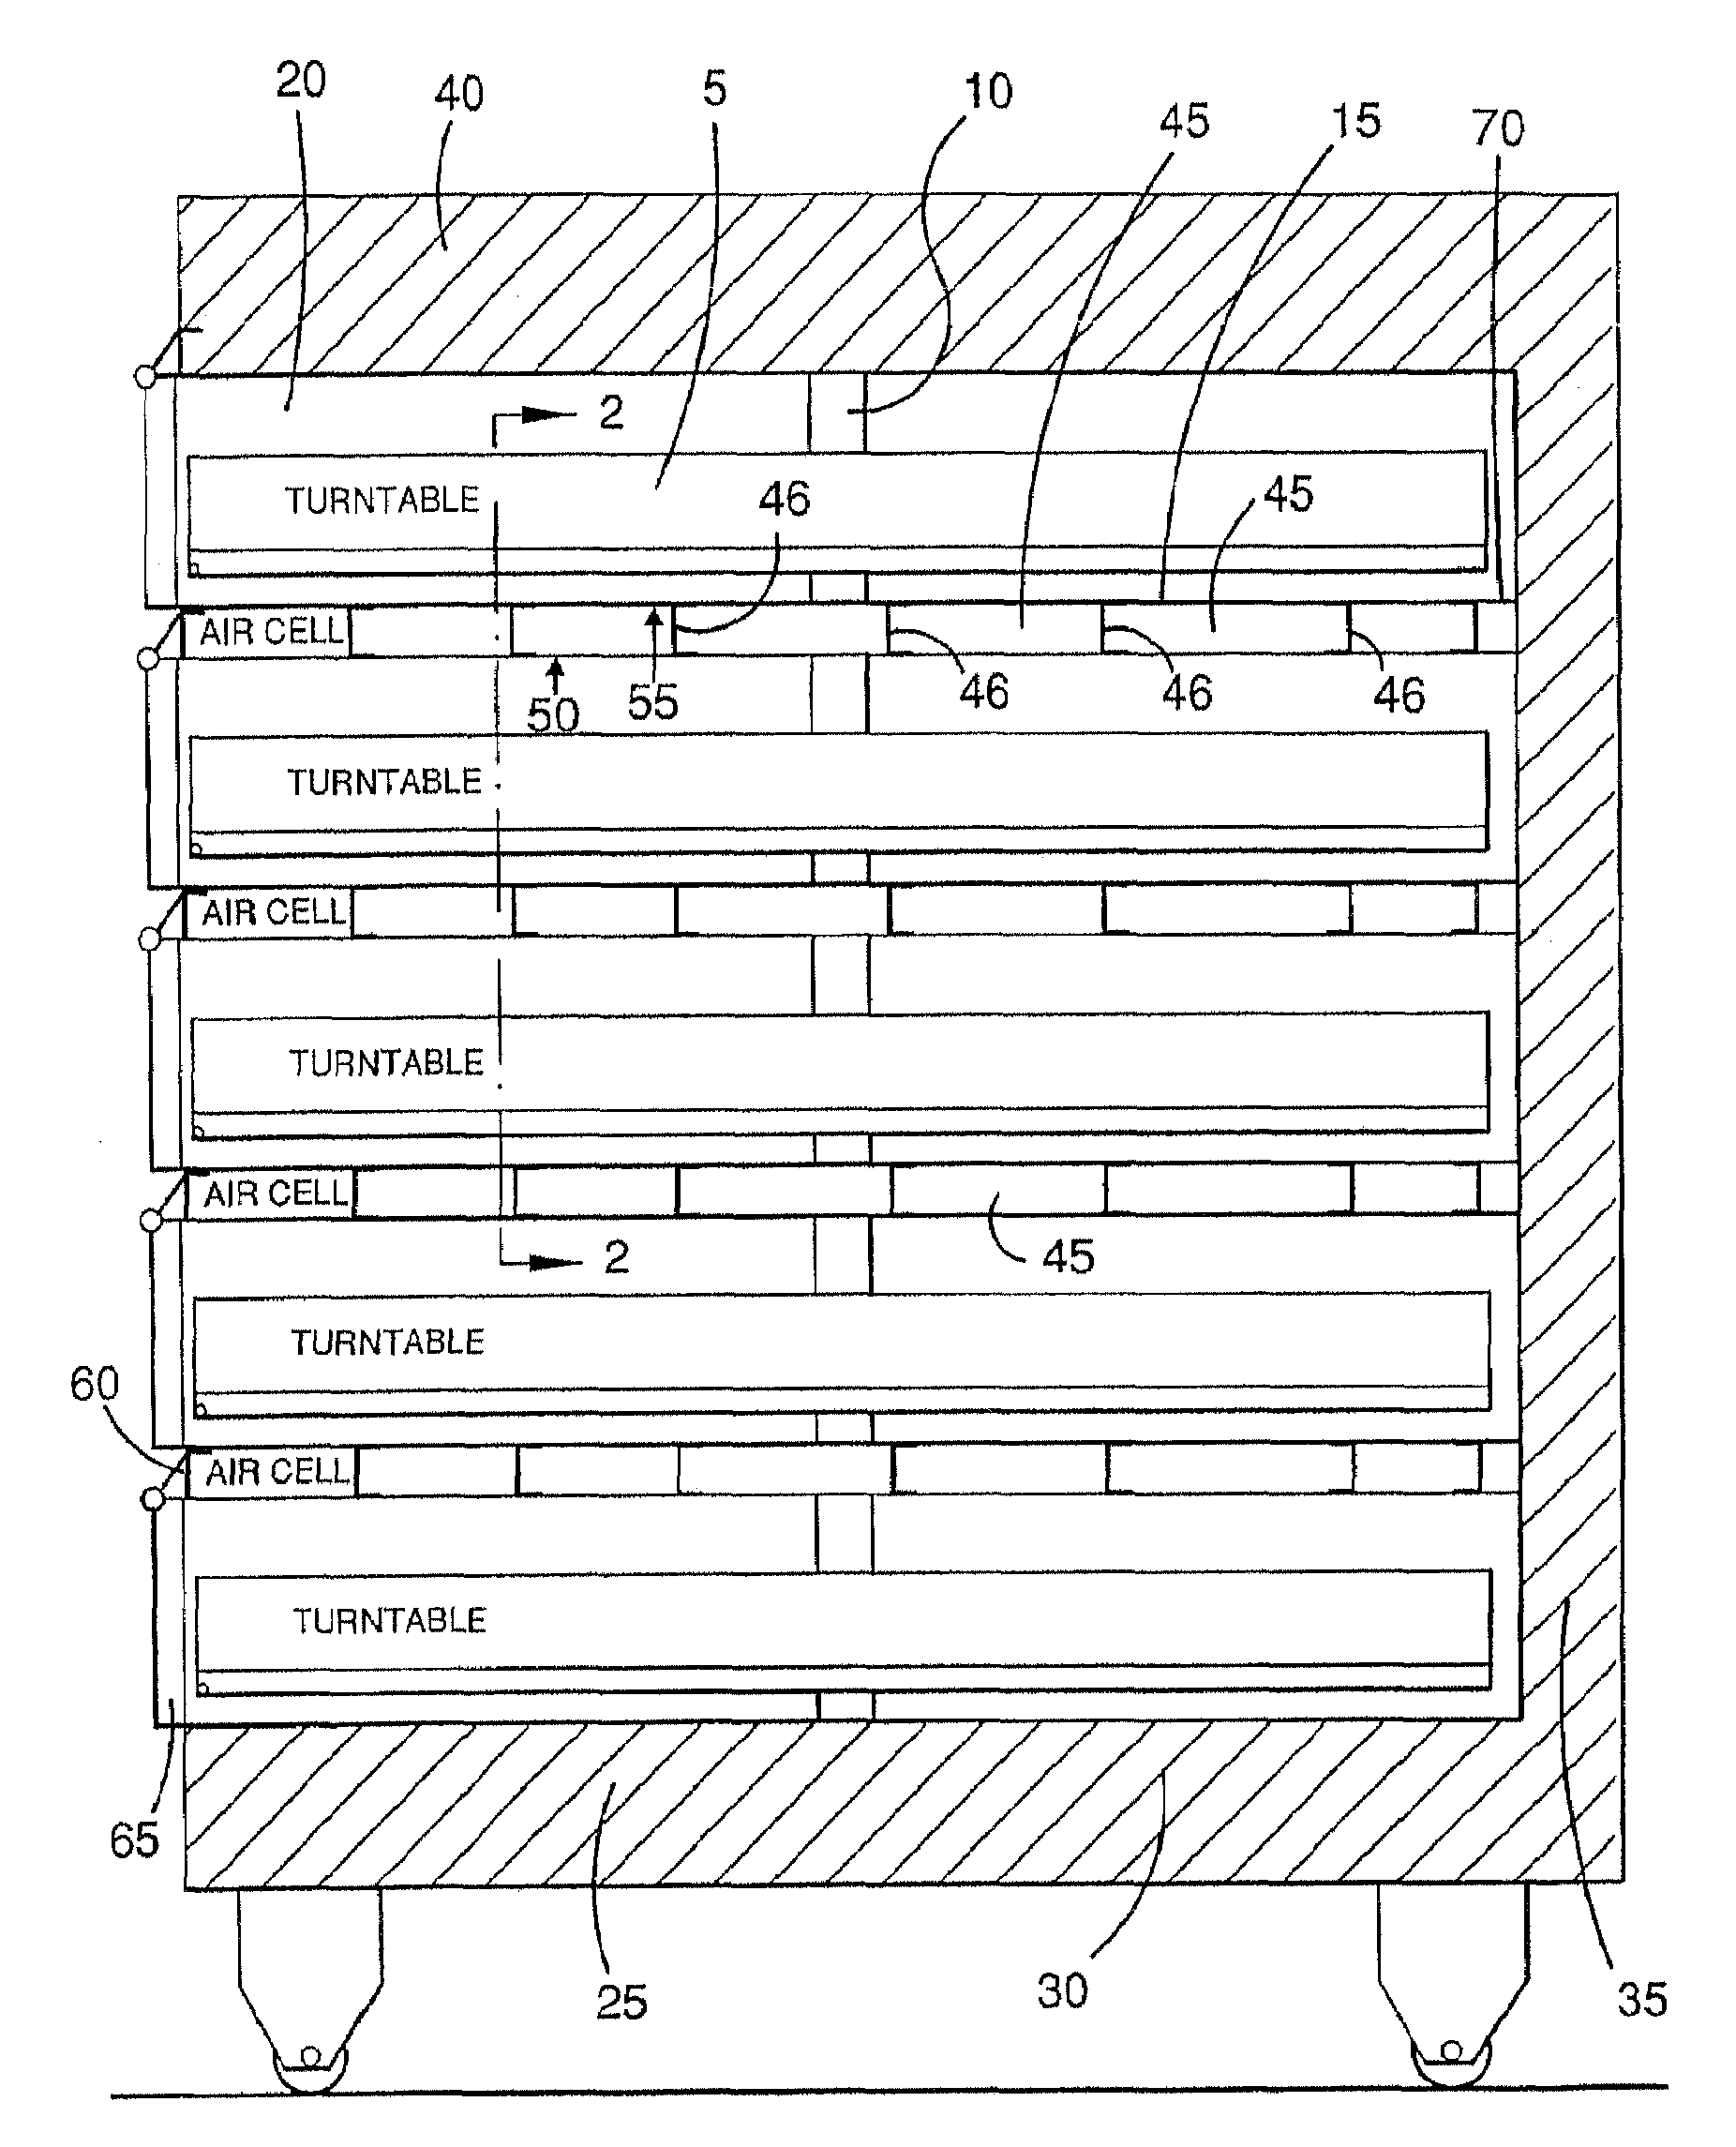 Insulation for baking chambers in a multi-deck baking oven